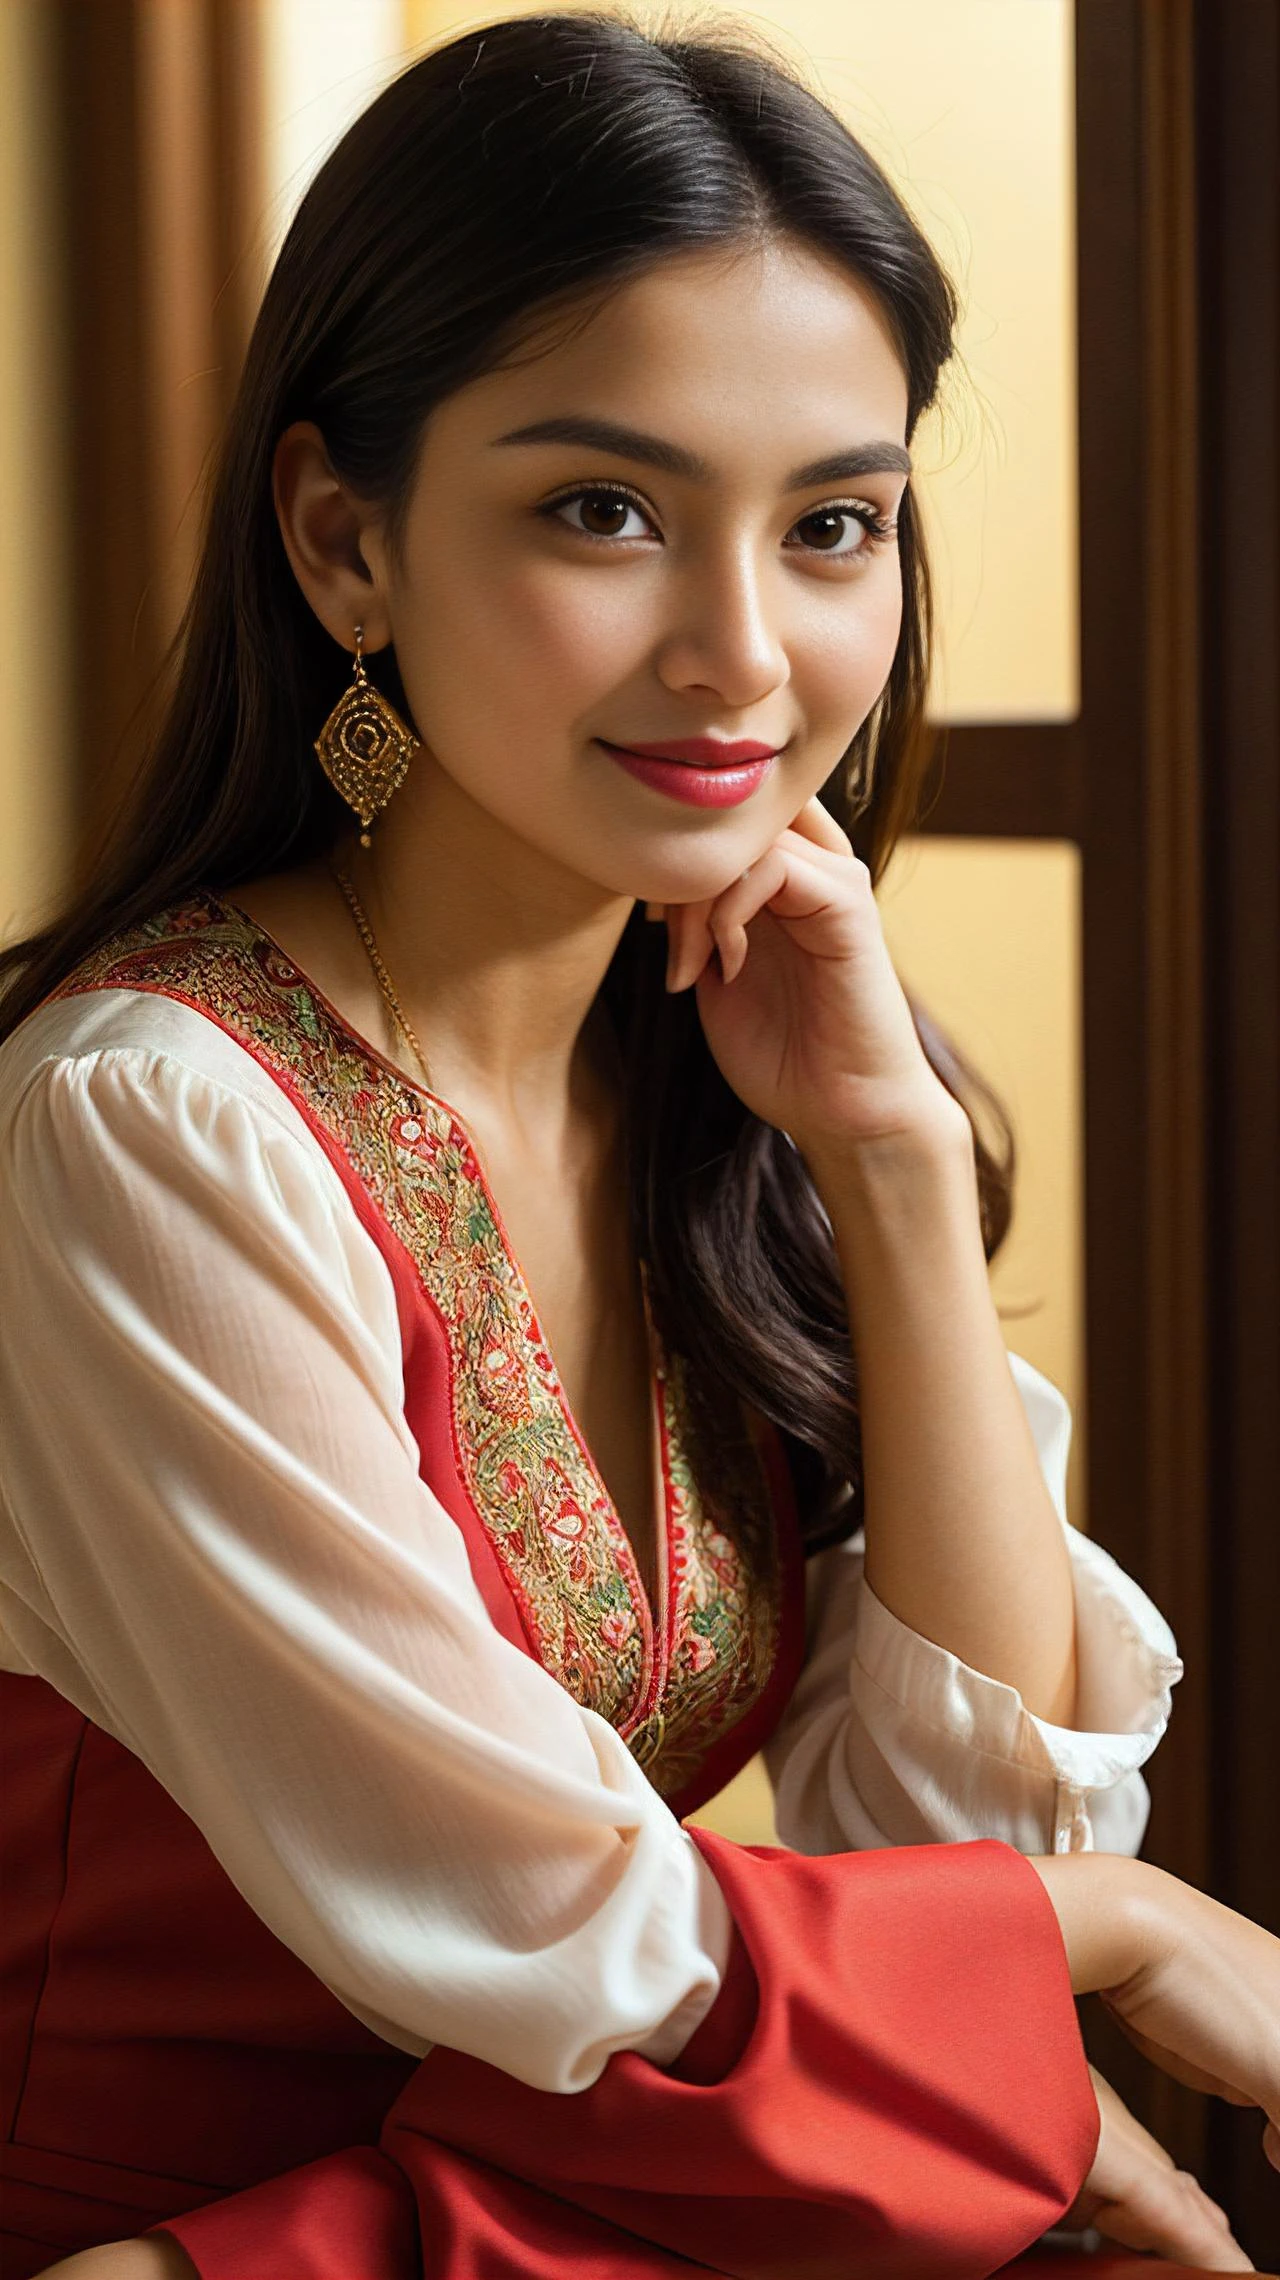 Woman, mysterious eyes, tender smile, vivid lipstick, cascading hairstyle, embroidered blouse, subtle makeup, expressive gaze, detailed earrings, cultural attire, soft lighting, natural beauty enhanced, captivating presence, photographic finesse, warmth radiating, gentle charisma, portrait elegance.